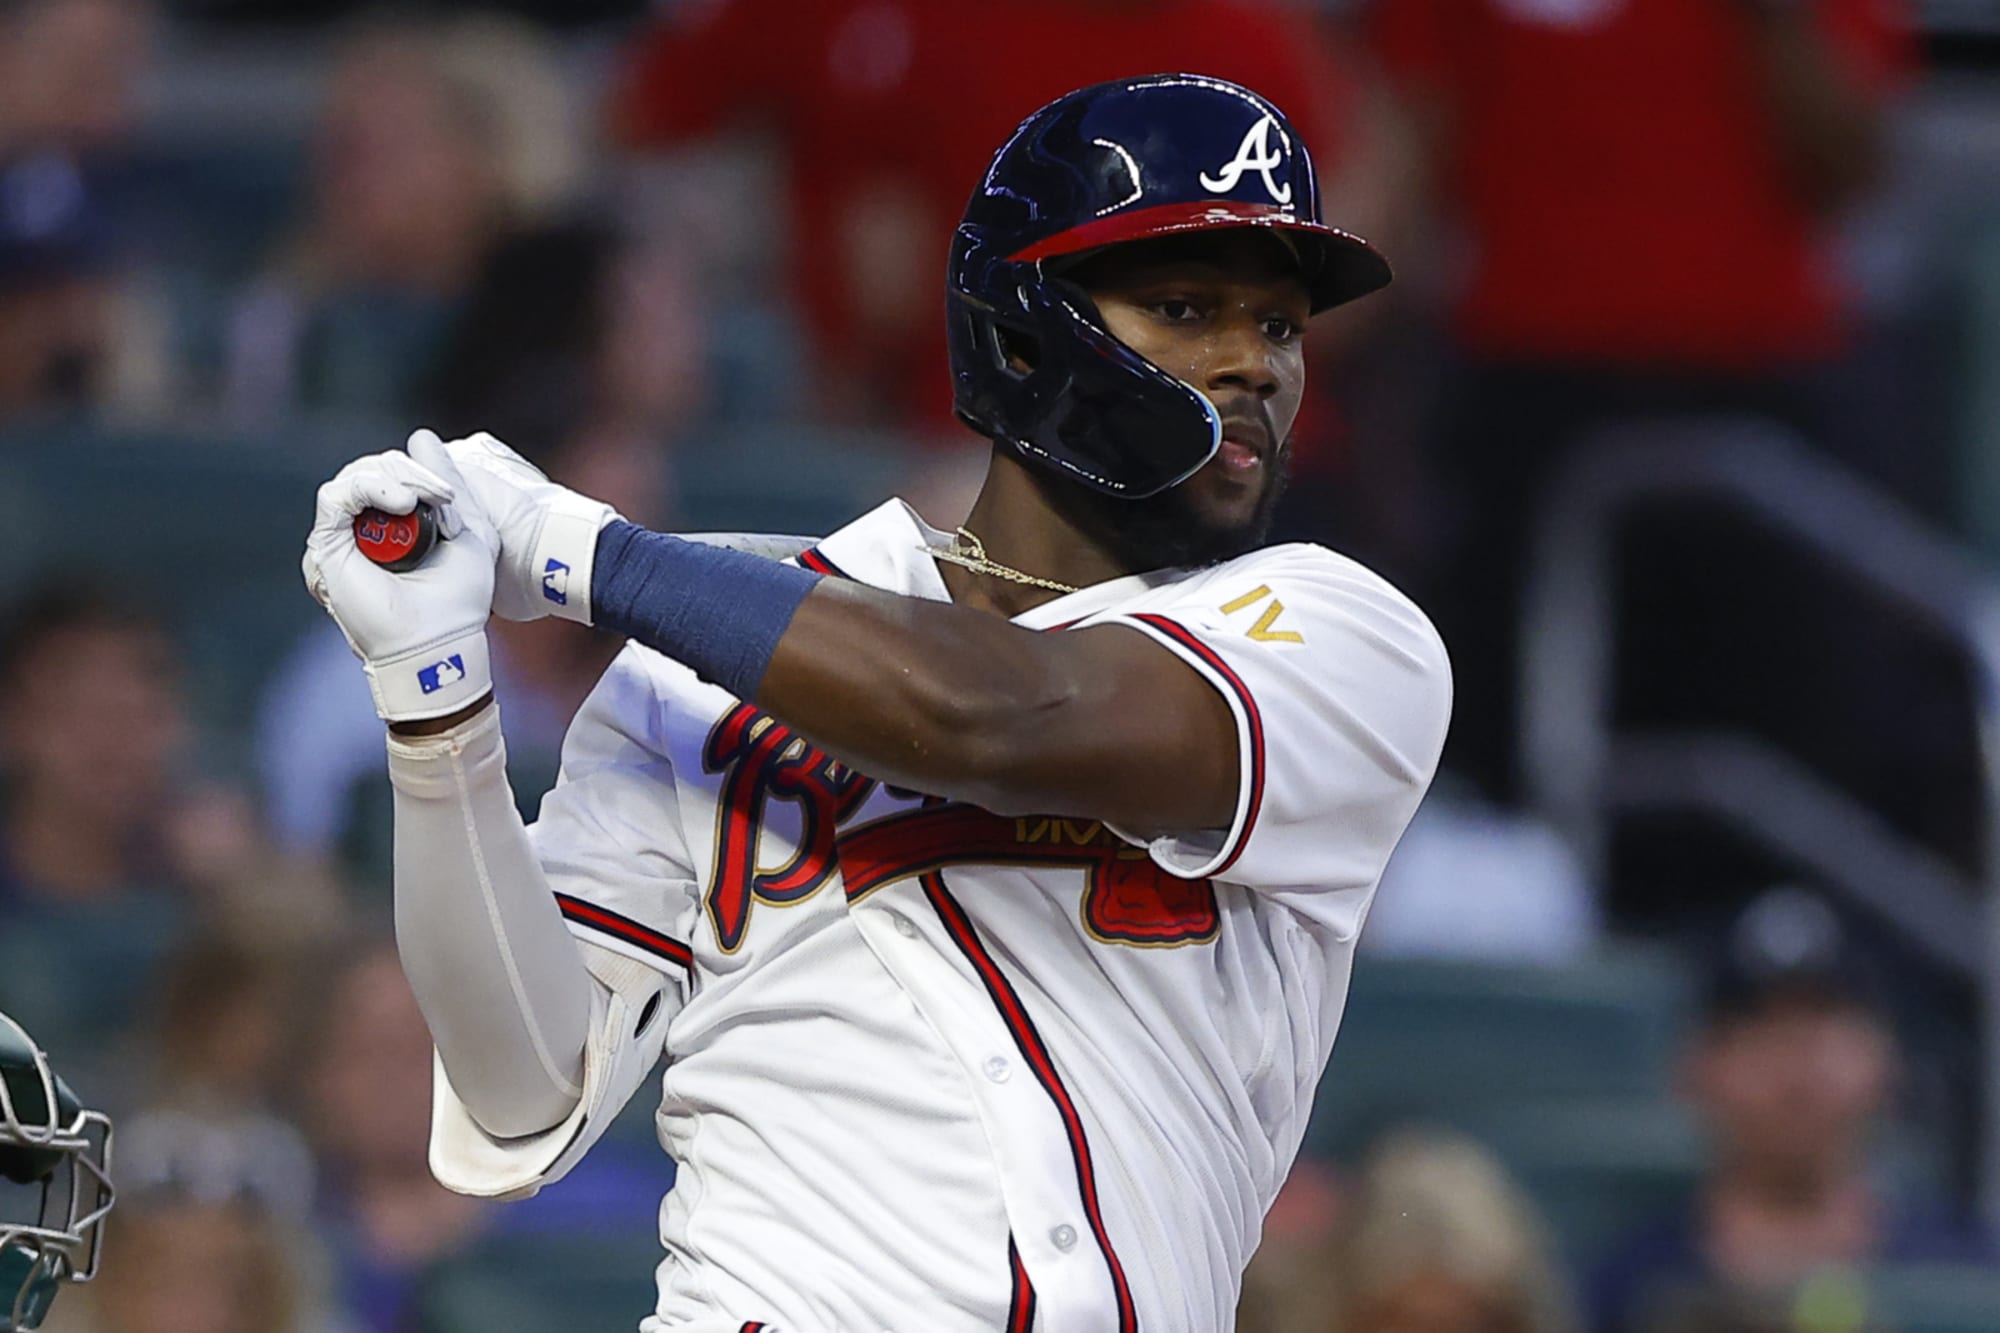 Braves: Spencer Strider, Michael Harris Battle for NL Rookie of the Year